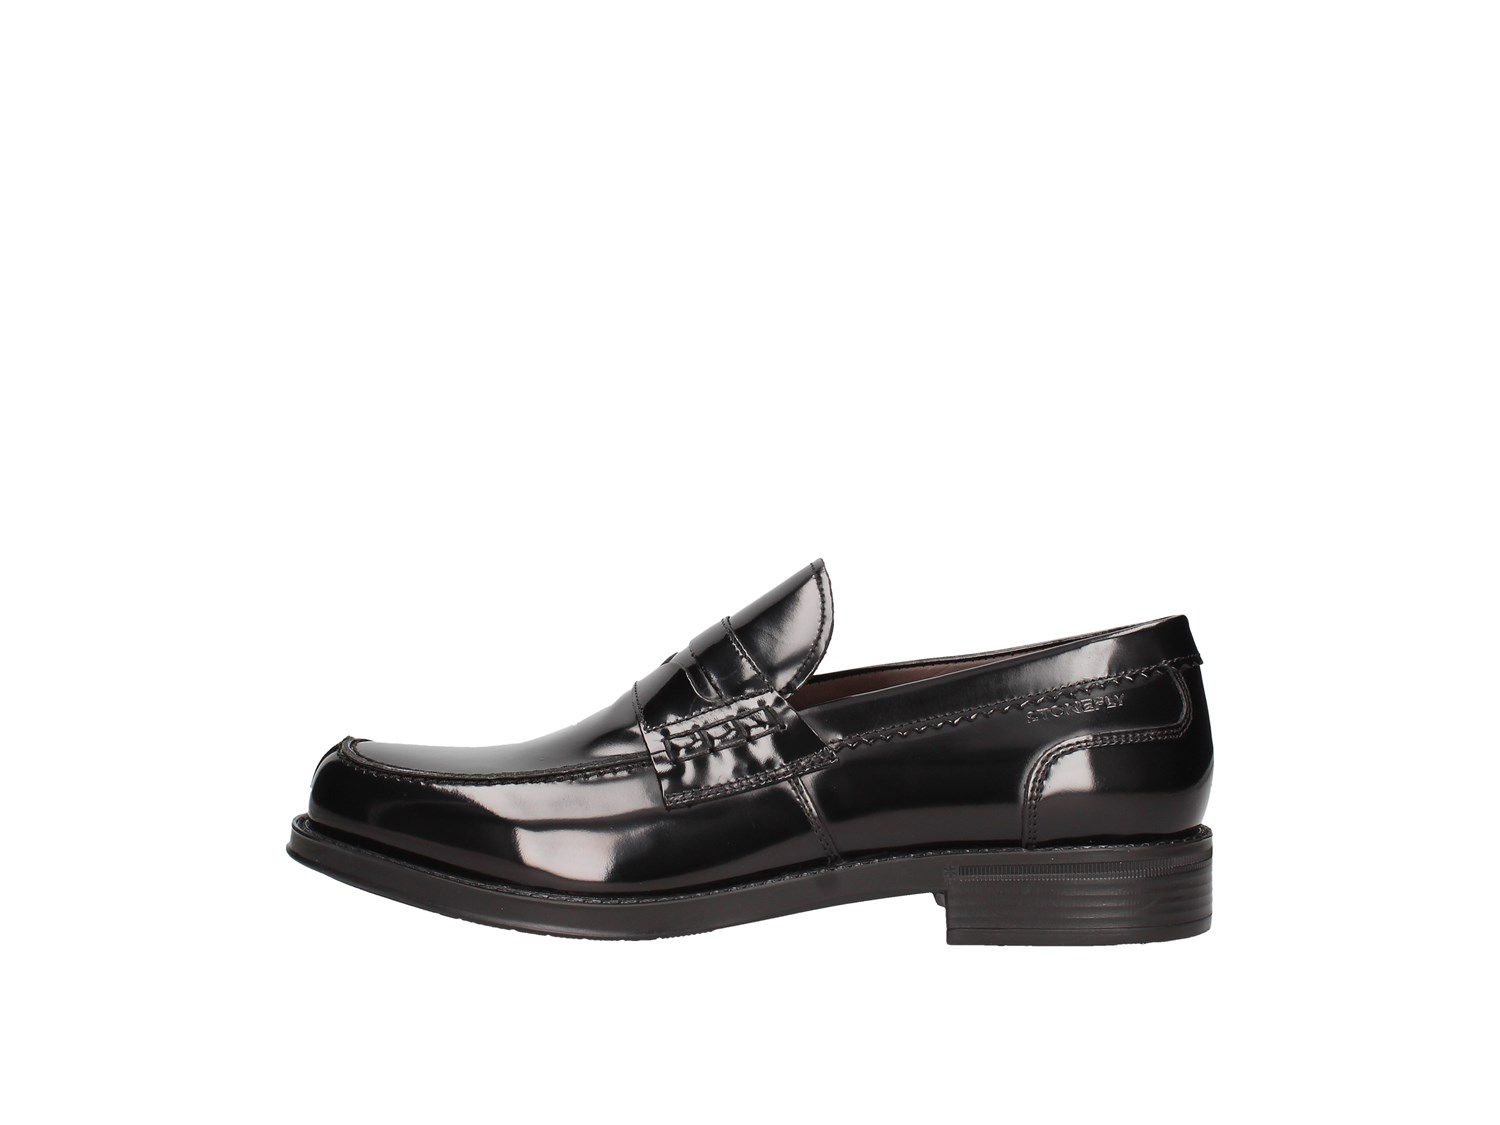 Stonefly 211972 Black Shoes Man Moccasin